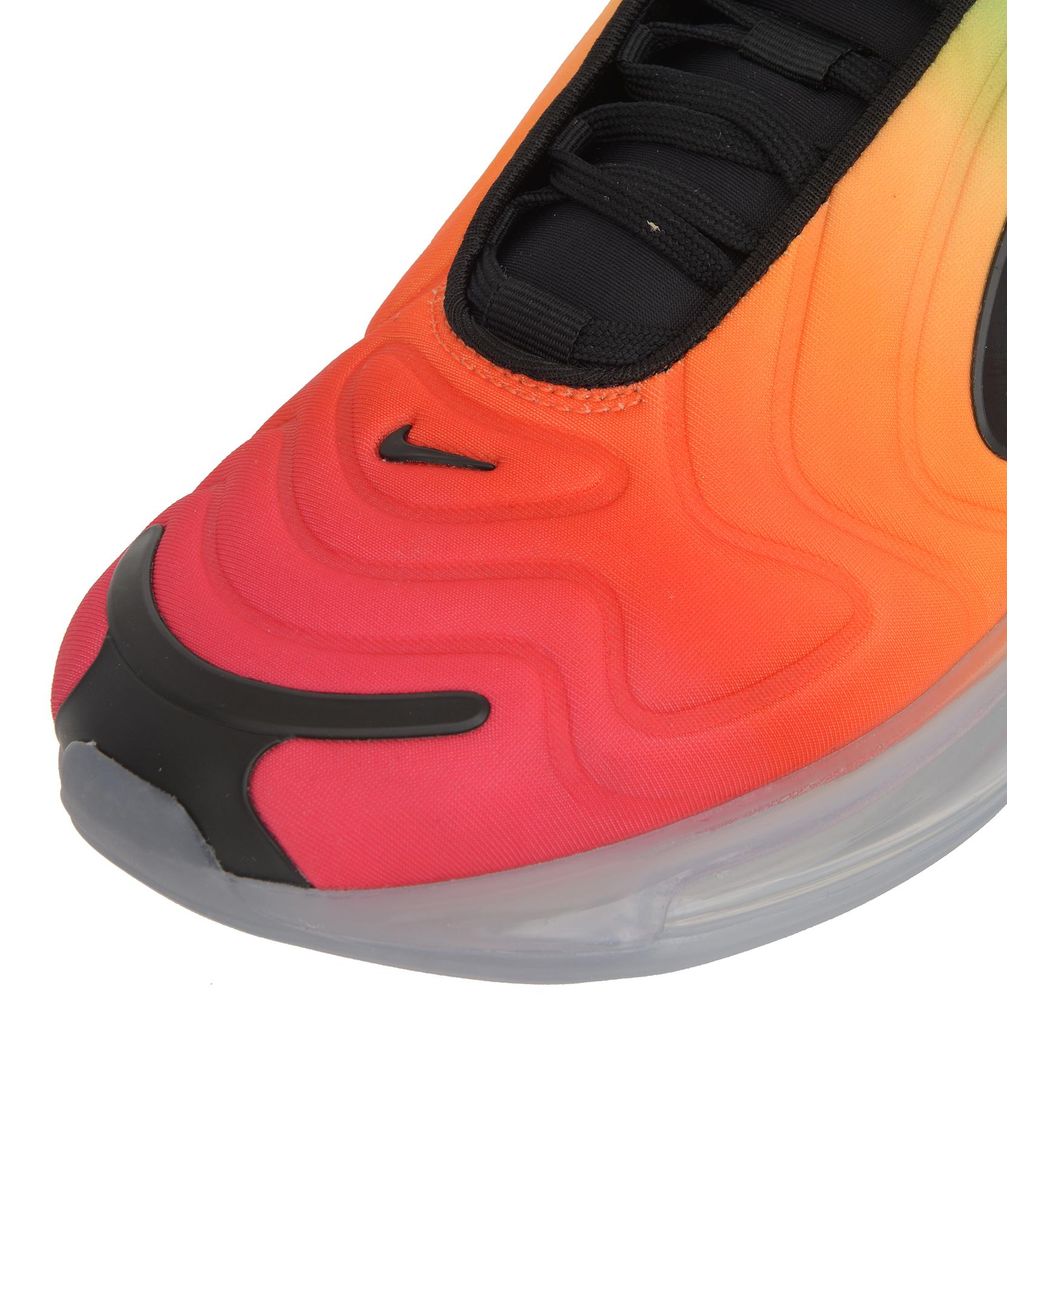 Nike Synthetic Air Max 720 Betrue Sneakers In Rainbow Colors With Visible  Air Unit. for Men | Lyst Australia